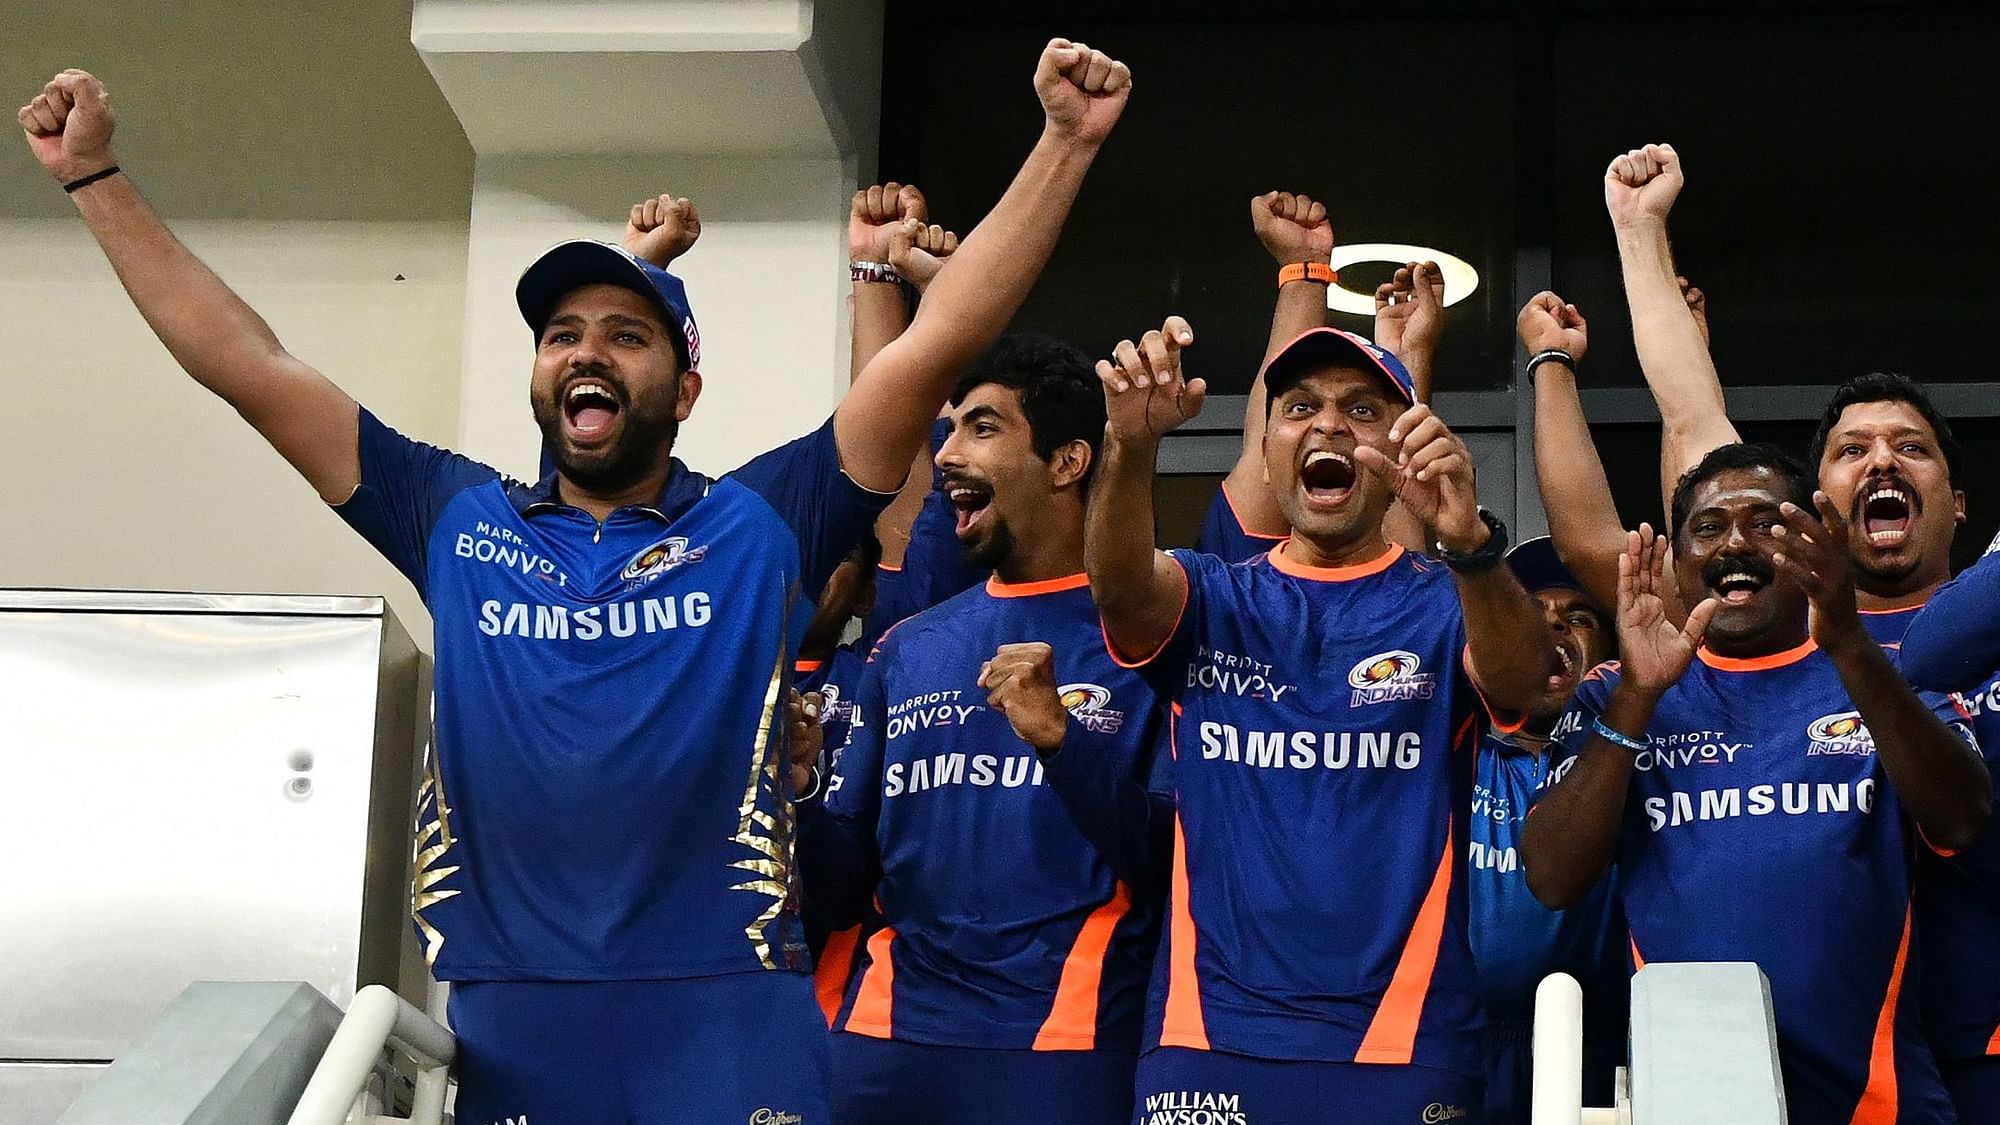 Mumbai Indians won their 5th IPL title by beating the Delhi Capitals in the Final